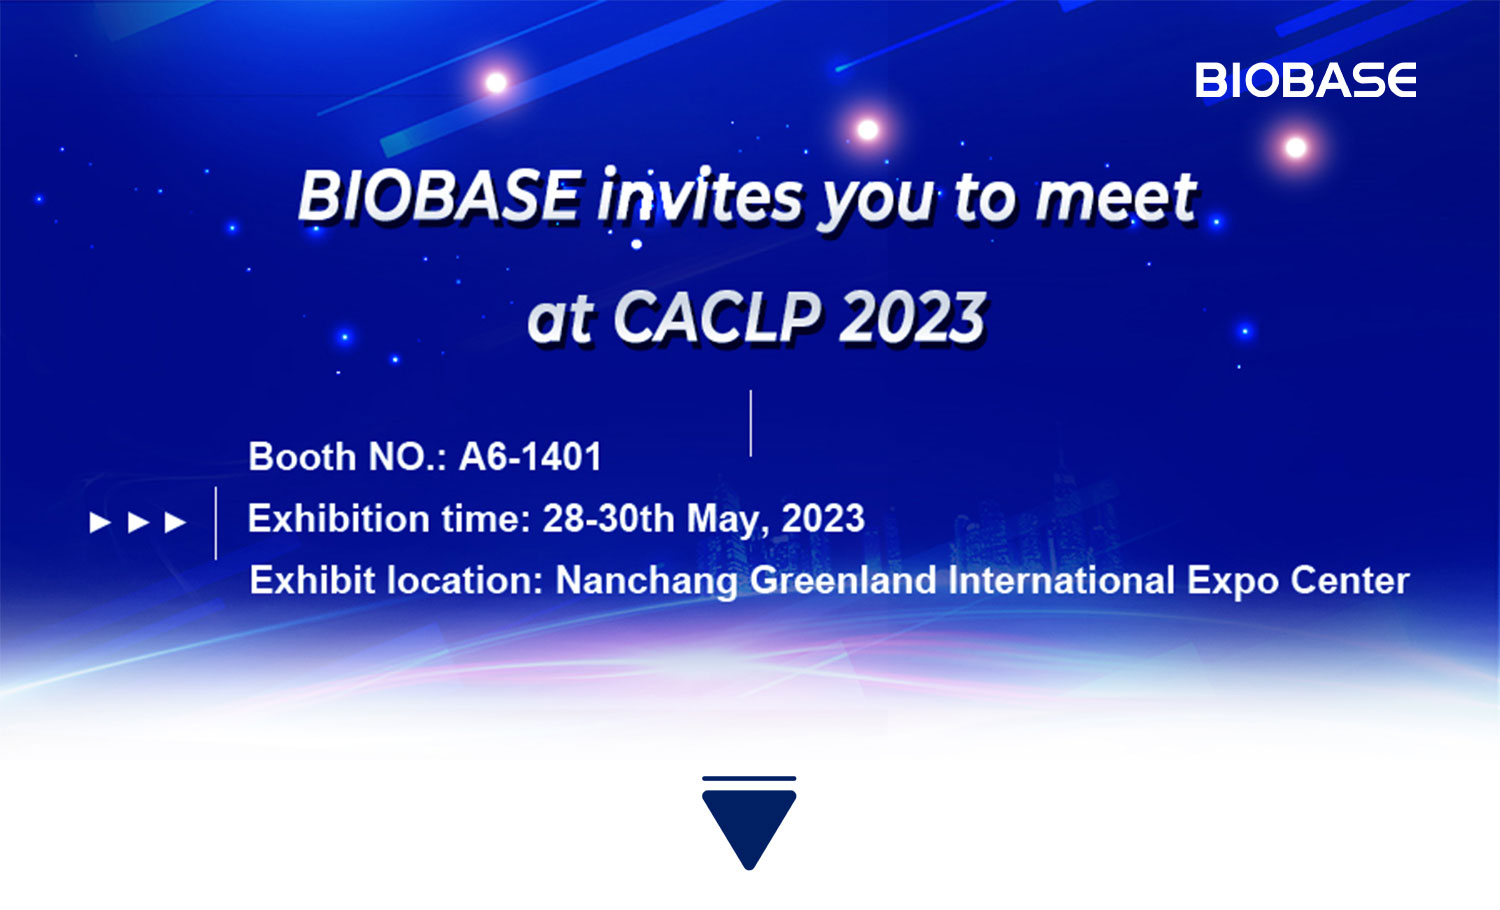 BIOBASE invites you to meet at CACLP 2023